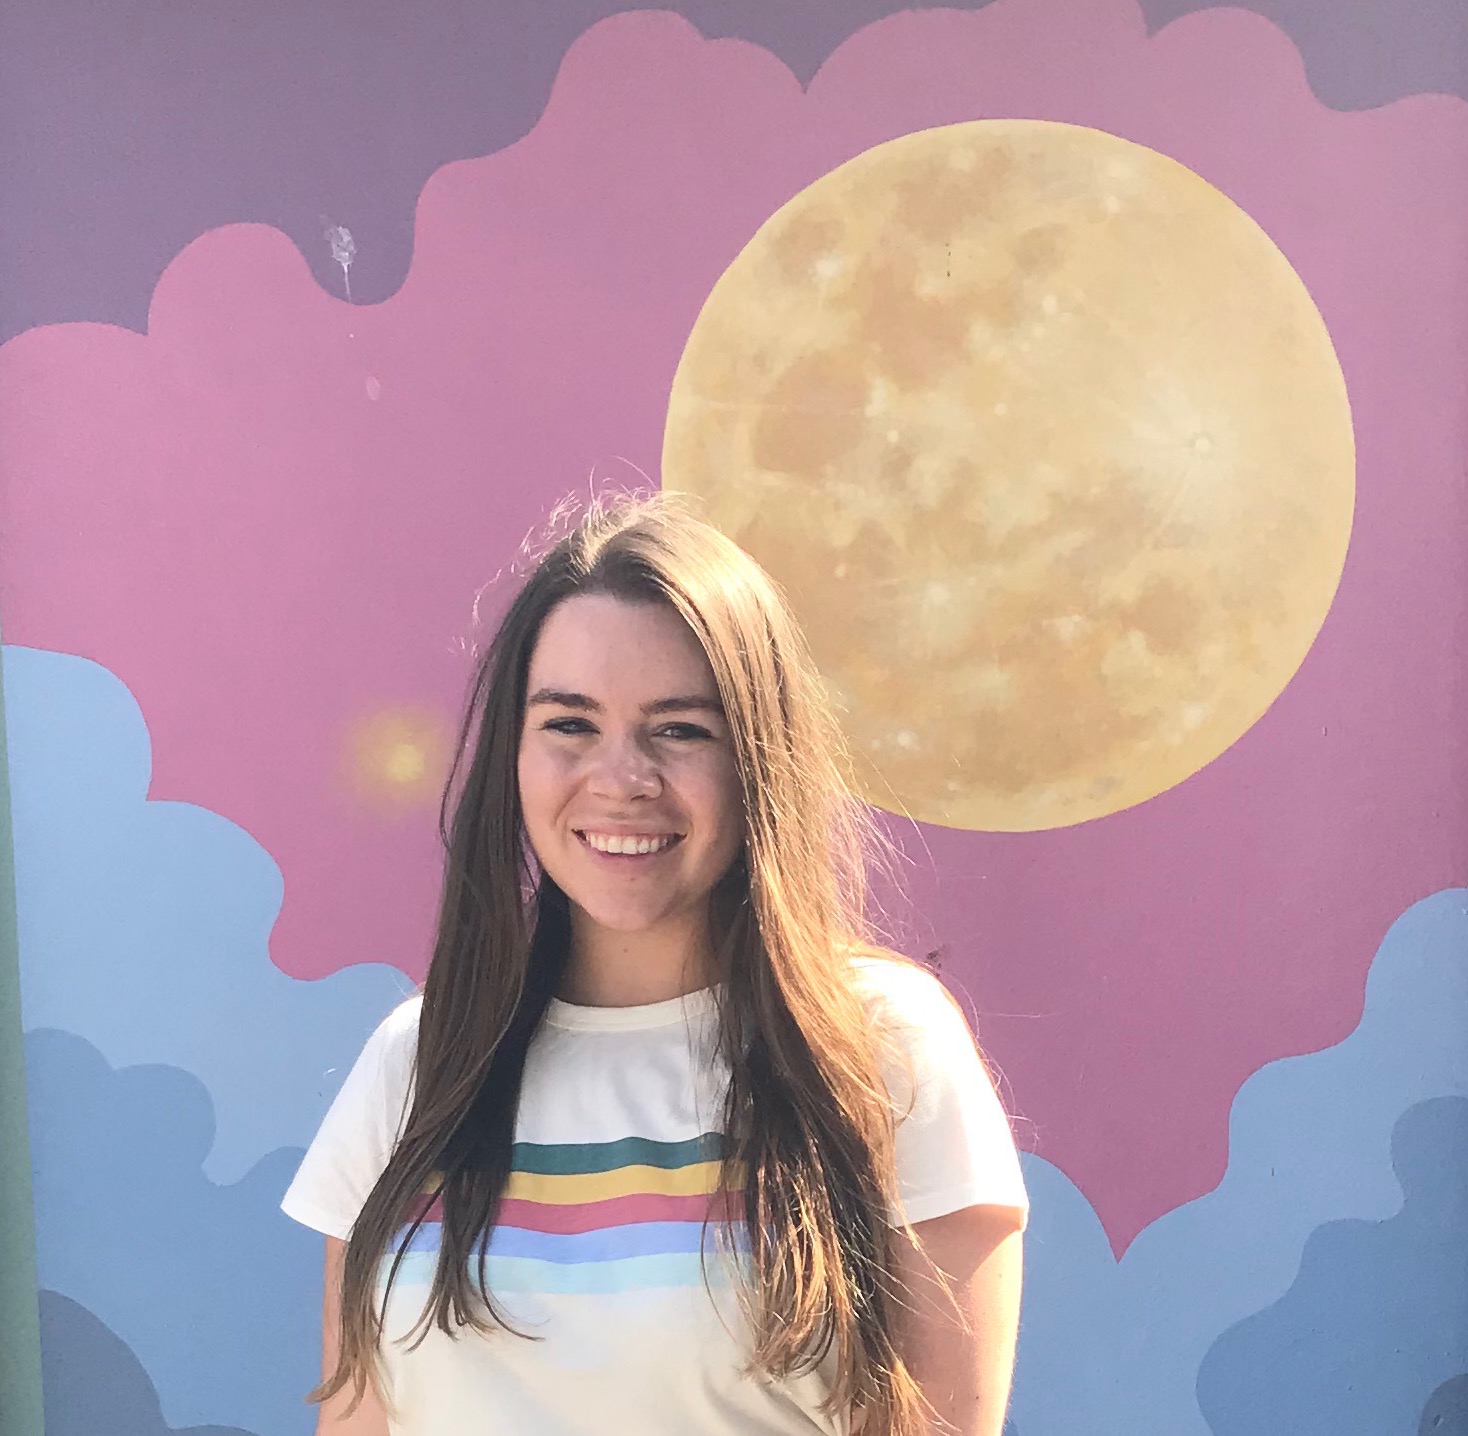 Jordan in front of a colorful Moon backdrop.